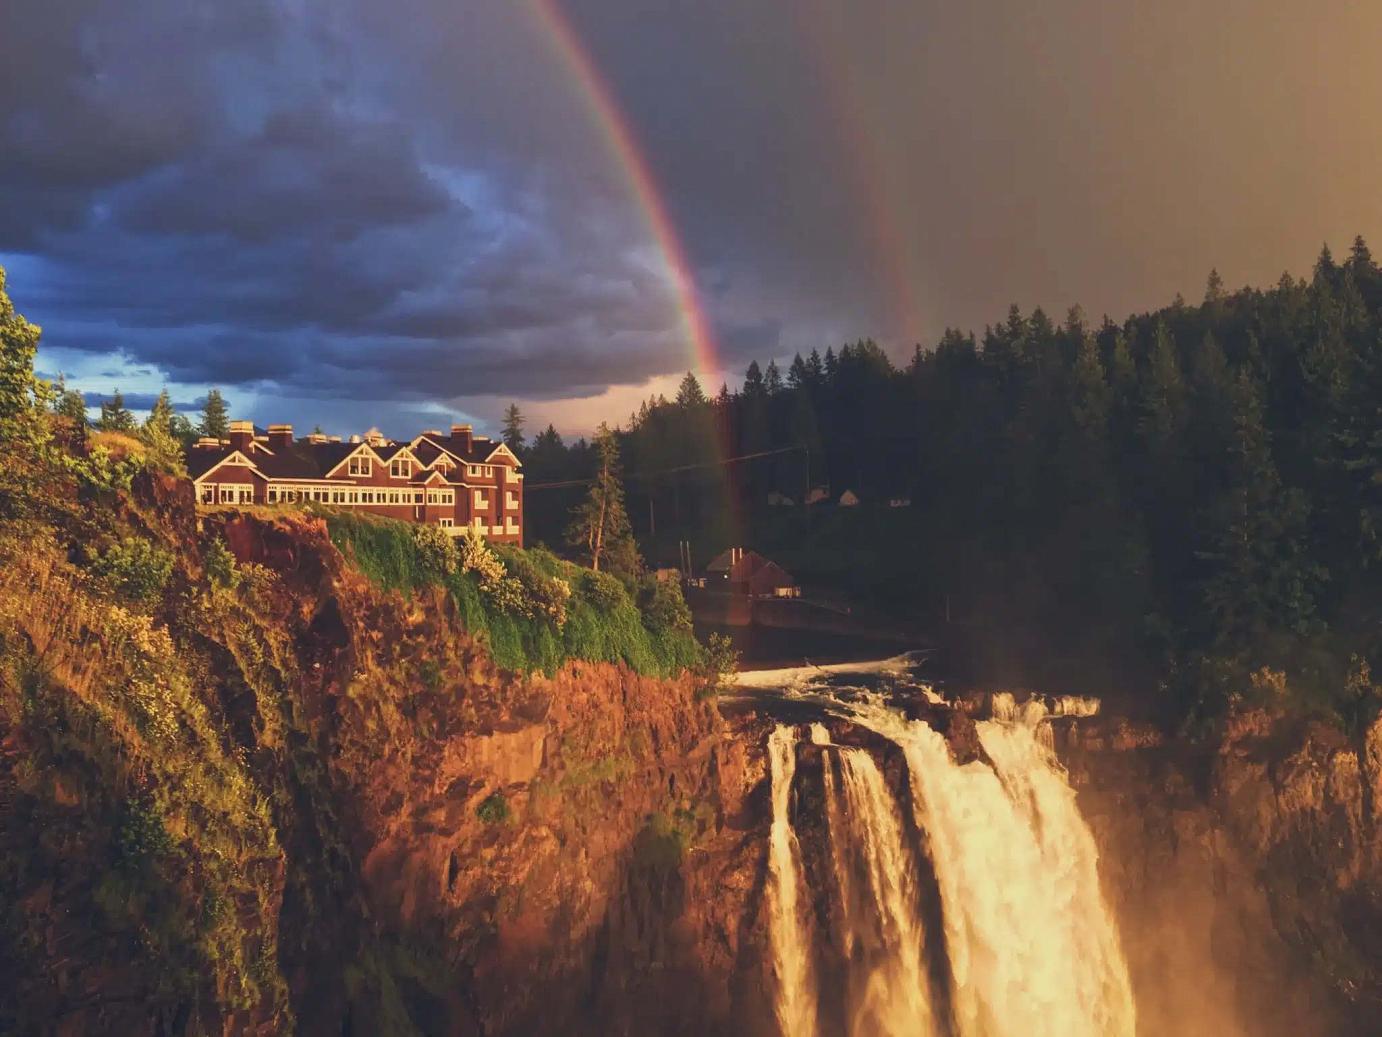 A view of Snoqualmie Falls and Salish Lodge